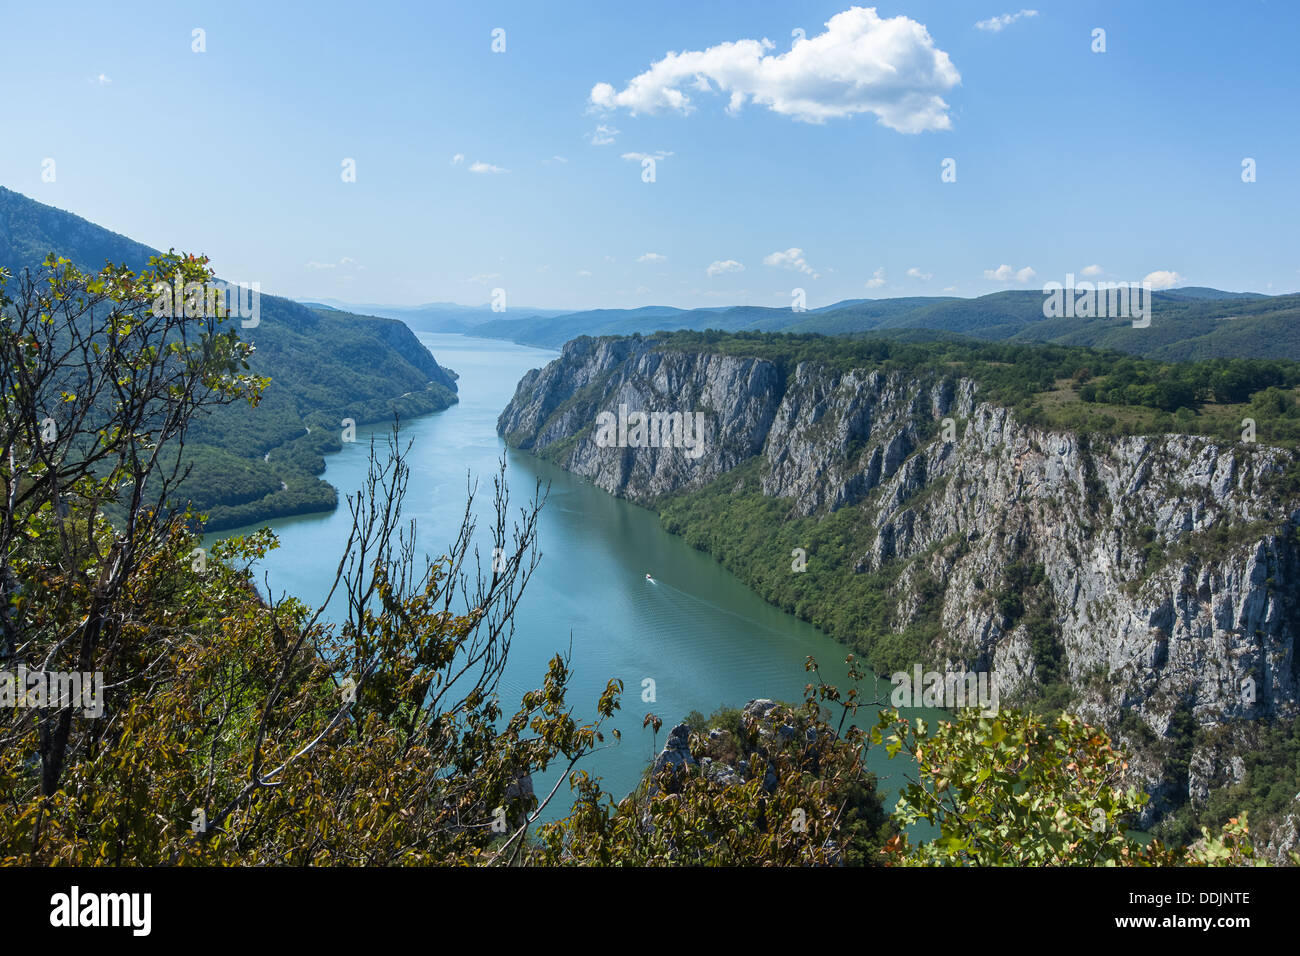 Danube gorge 'iron gate' on the Serbian-Romanian border. The Djerdap Gorge is one of the largest gorges in Europe. Stock Photo